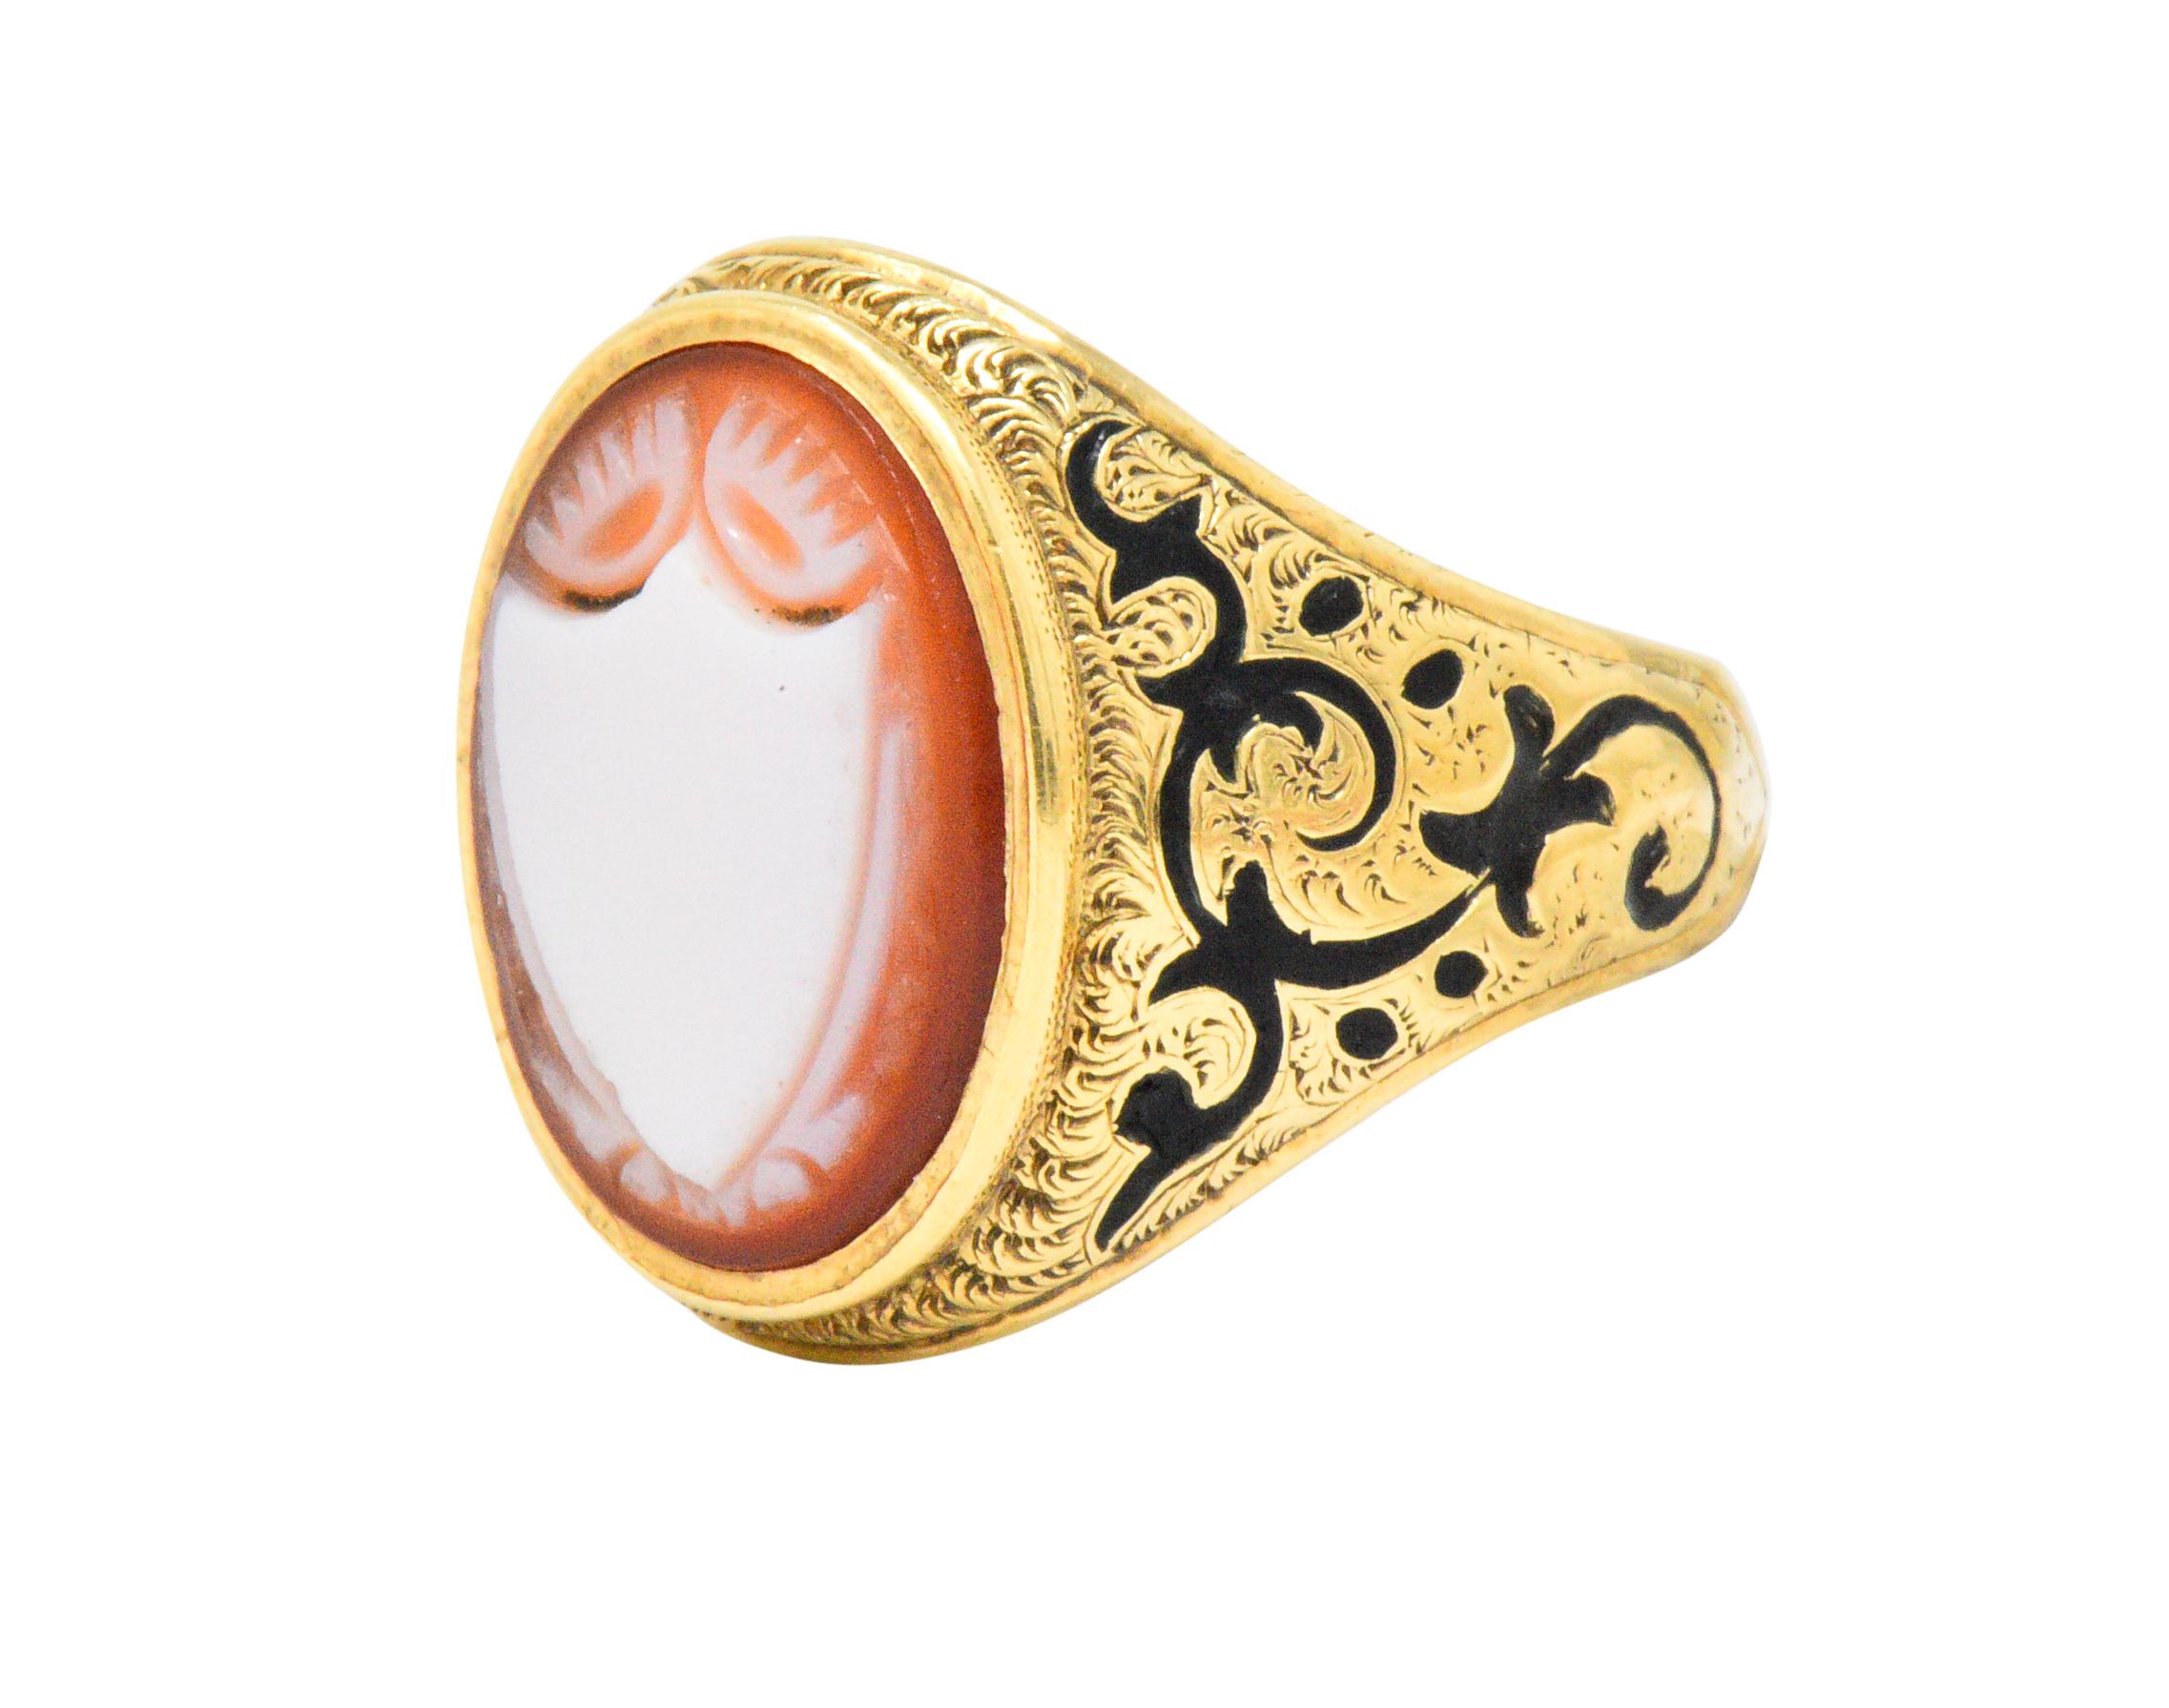 Signet style ring centering an oval cameo of banded carnelian, measuring approximately 14.6 x 11.5 mm

Deeply carved to depict a bright white shield accented by thistle motif, against an orangey-red background

Bezel set low within mounting ornately